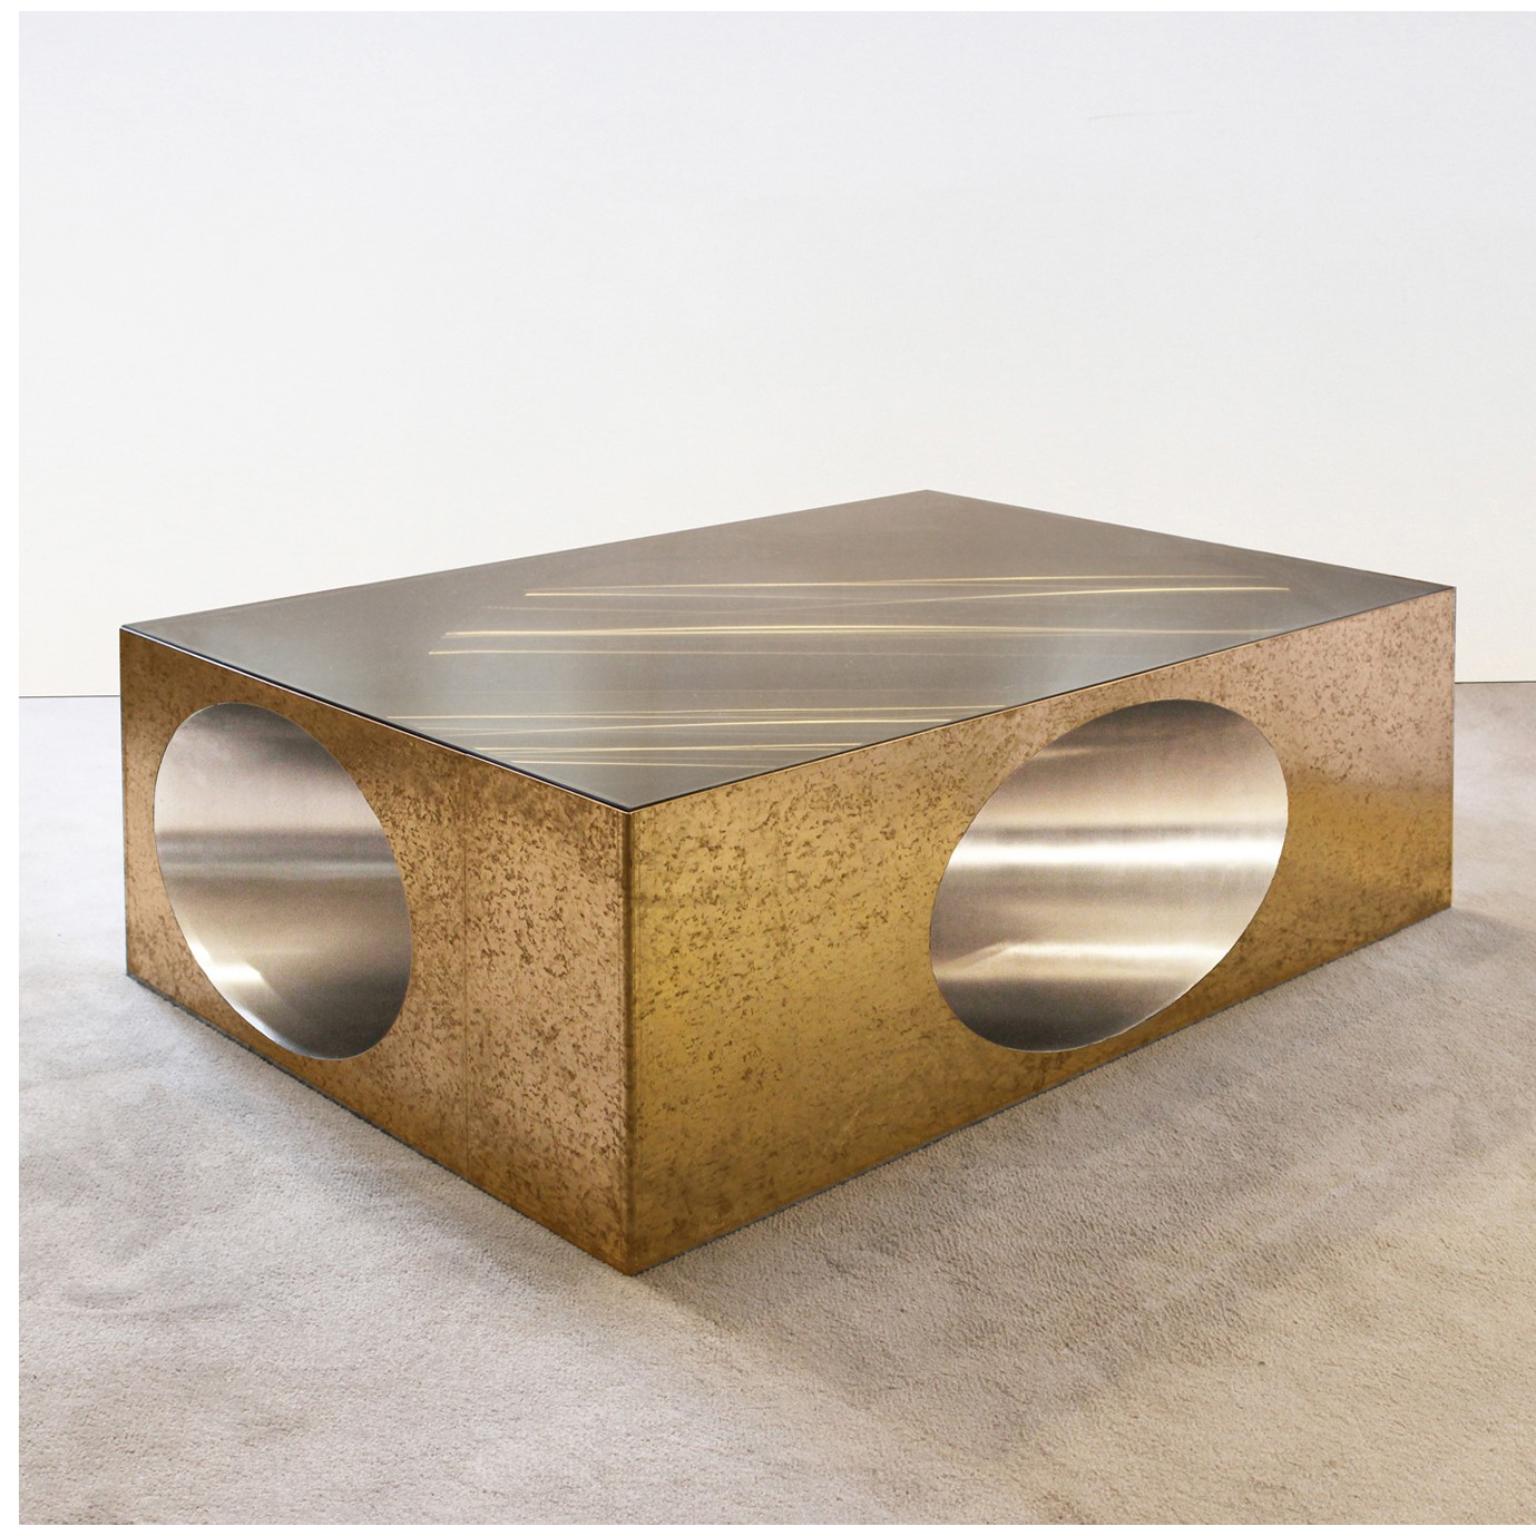 Hol-low table by Christian Zahr
Dimensions: W 120 x D 80 x H 40 cm
Materials: Brass- Brass tin lined inside- Tainted glass

Each Piece is Handmade.

Christian Zahr studied architecture at the Academie Libanaise des Beaux Arts, Beirut, Lebanon.